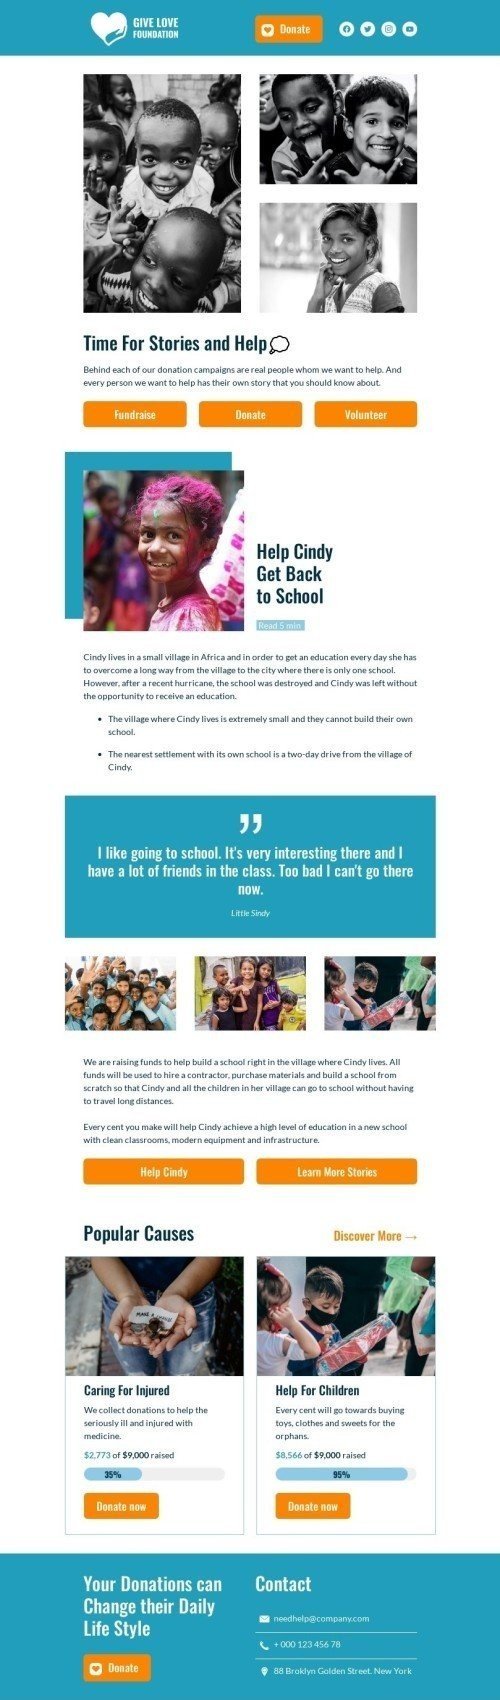 Newsletters email template "Storytelling" for nonprofit industry desktop view